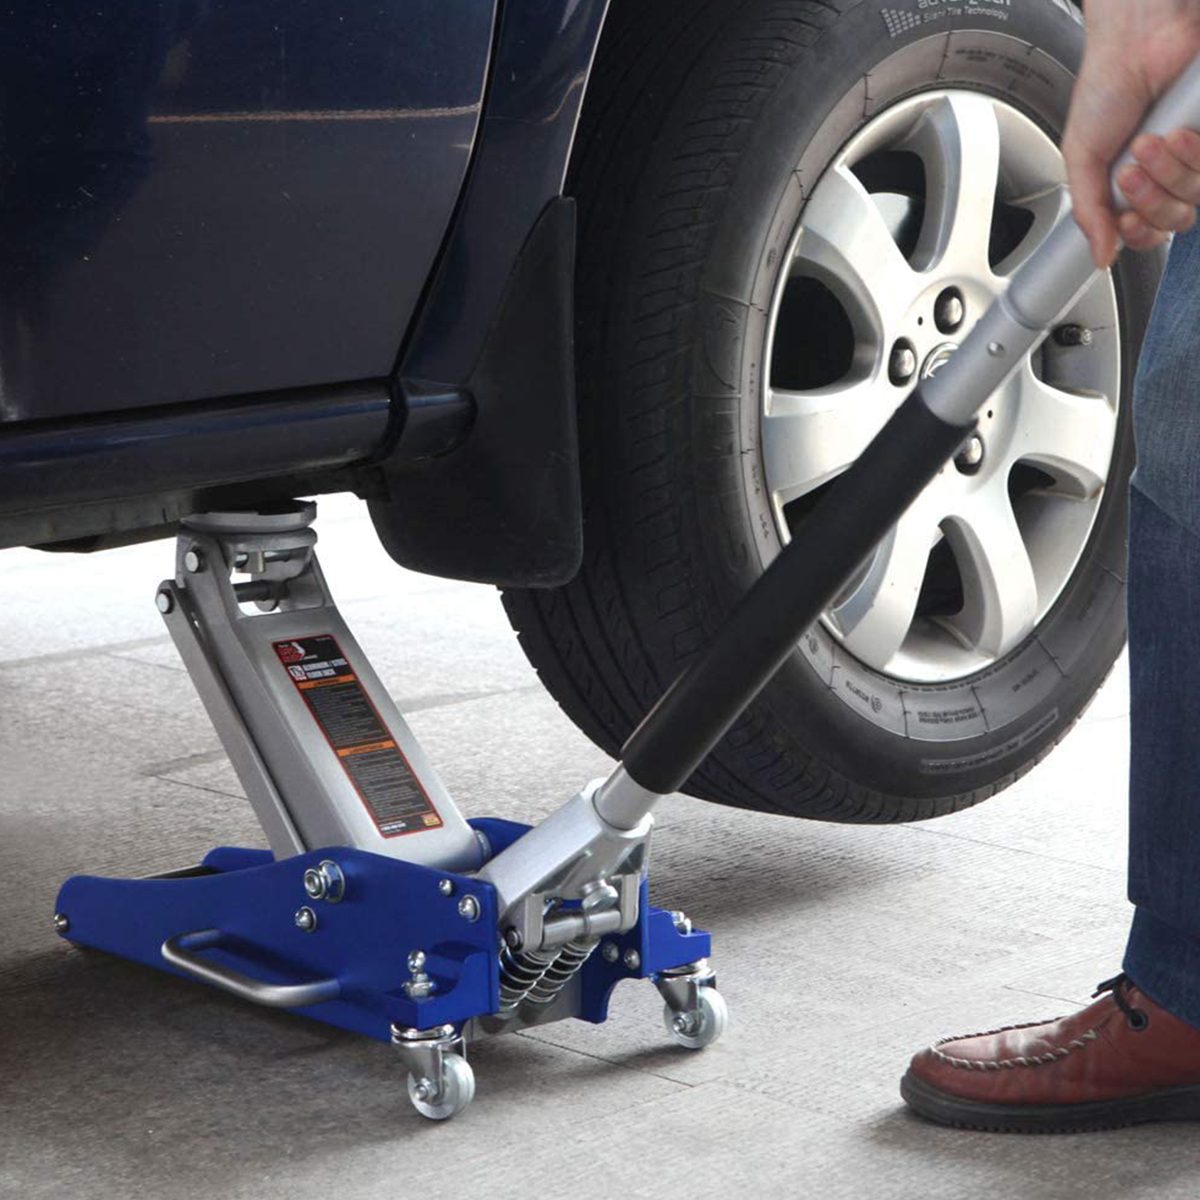 10 Must-Have Tools for Mechanics You Should Own